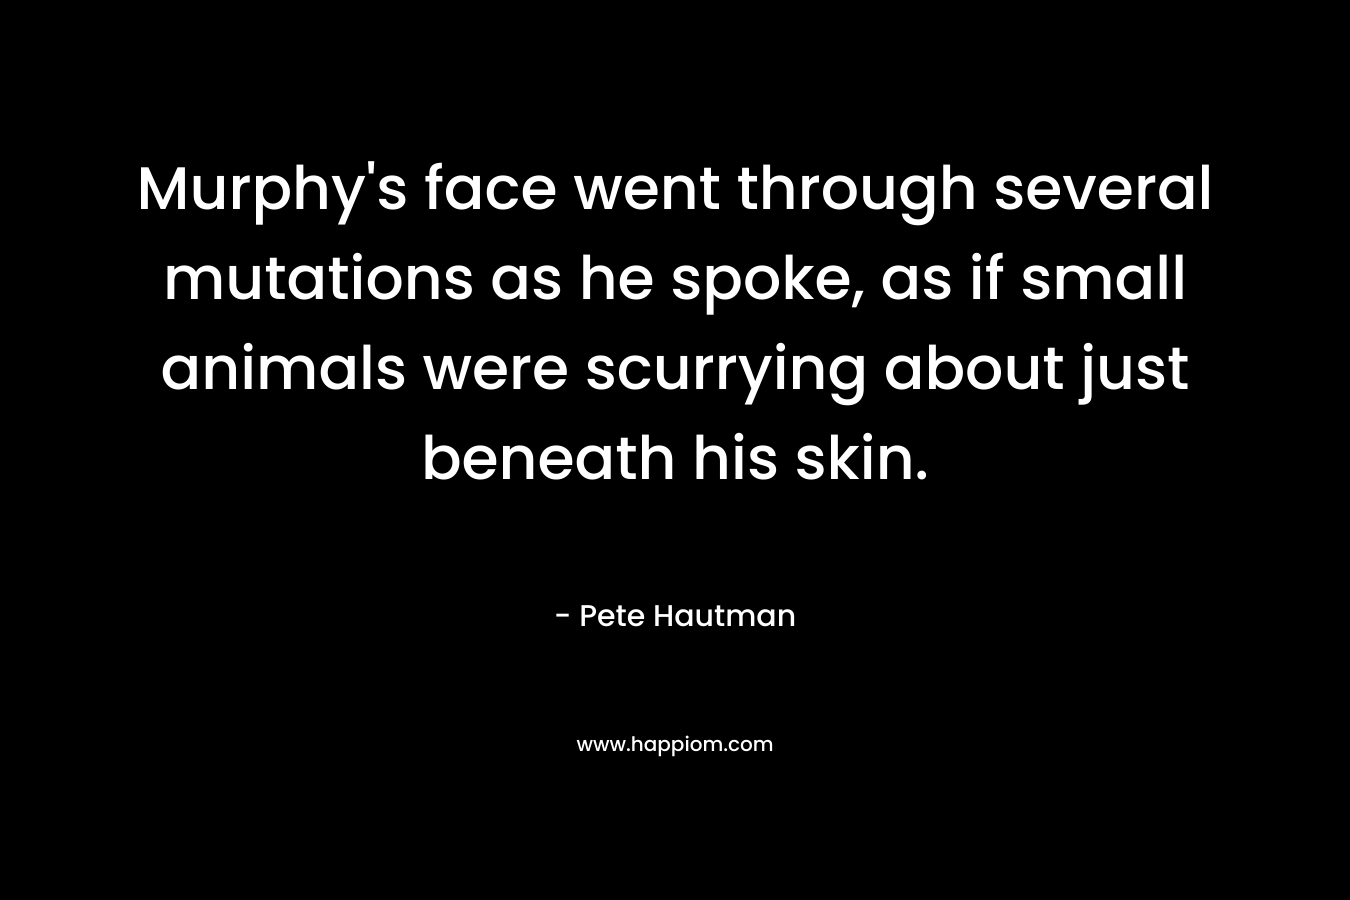 Murphy’s face went through several mutations as he spoke, as if small animals were scurrying about just beneath his skin. – Pete Hautman